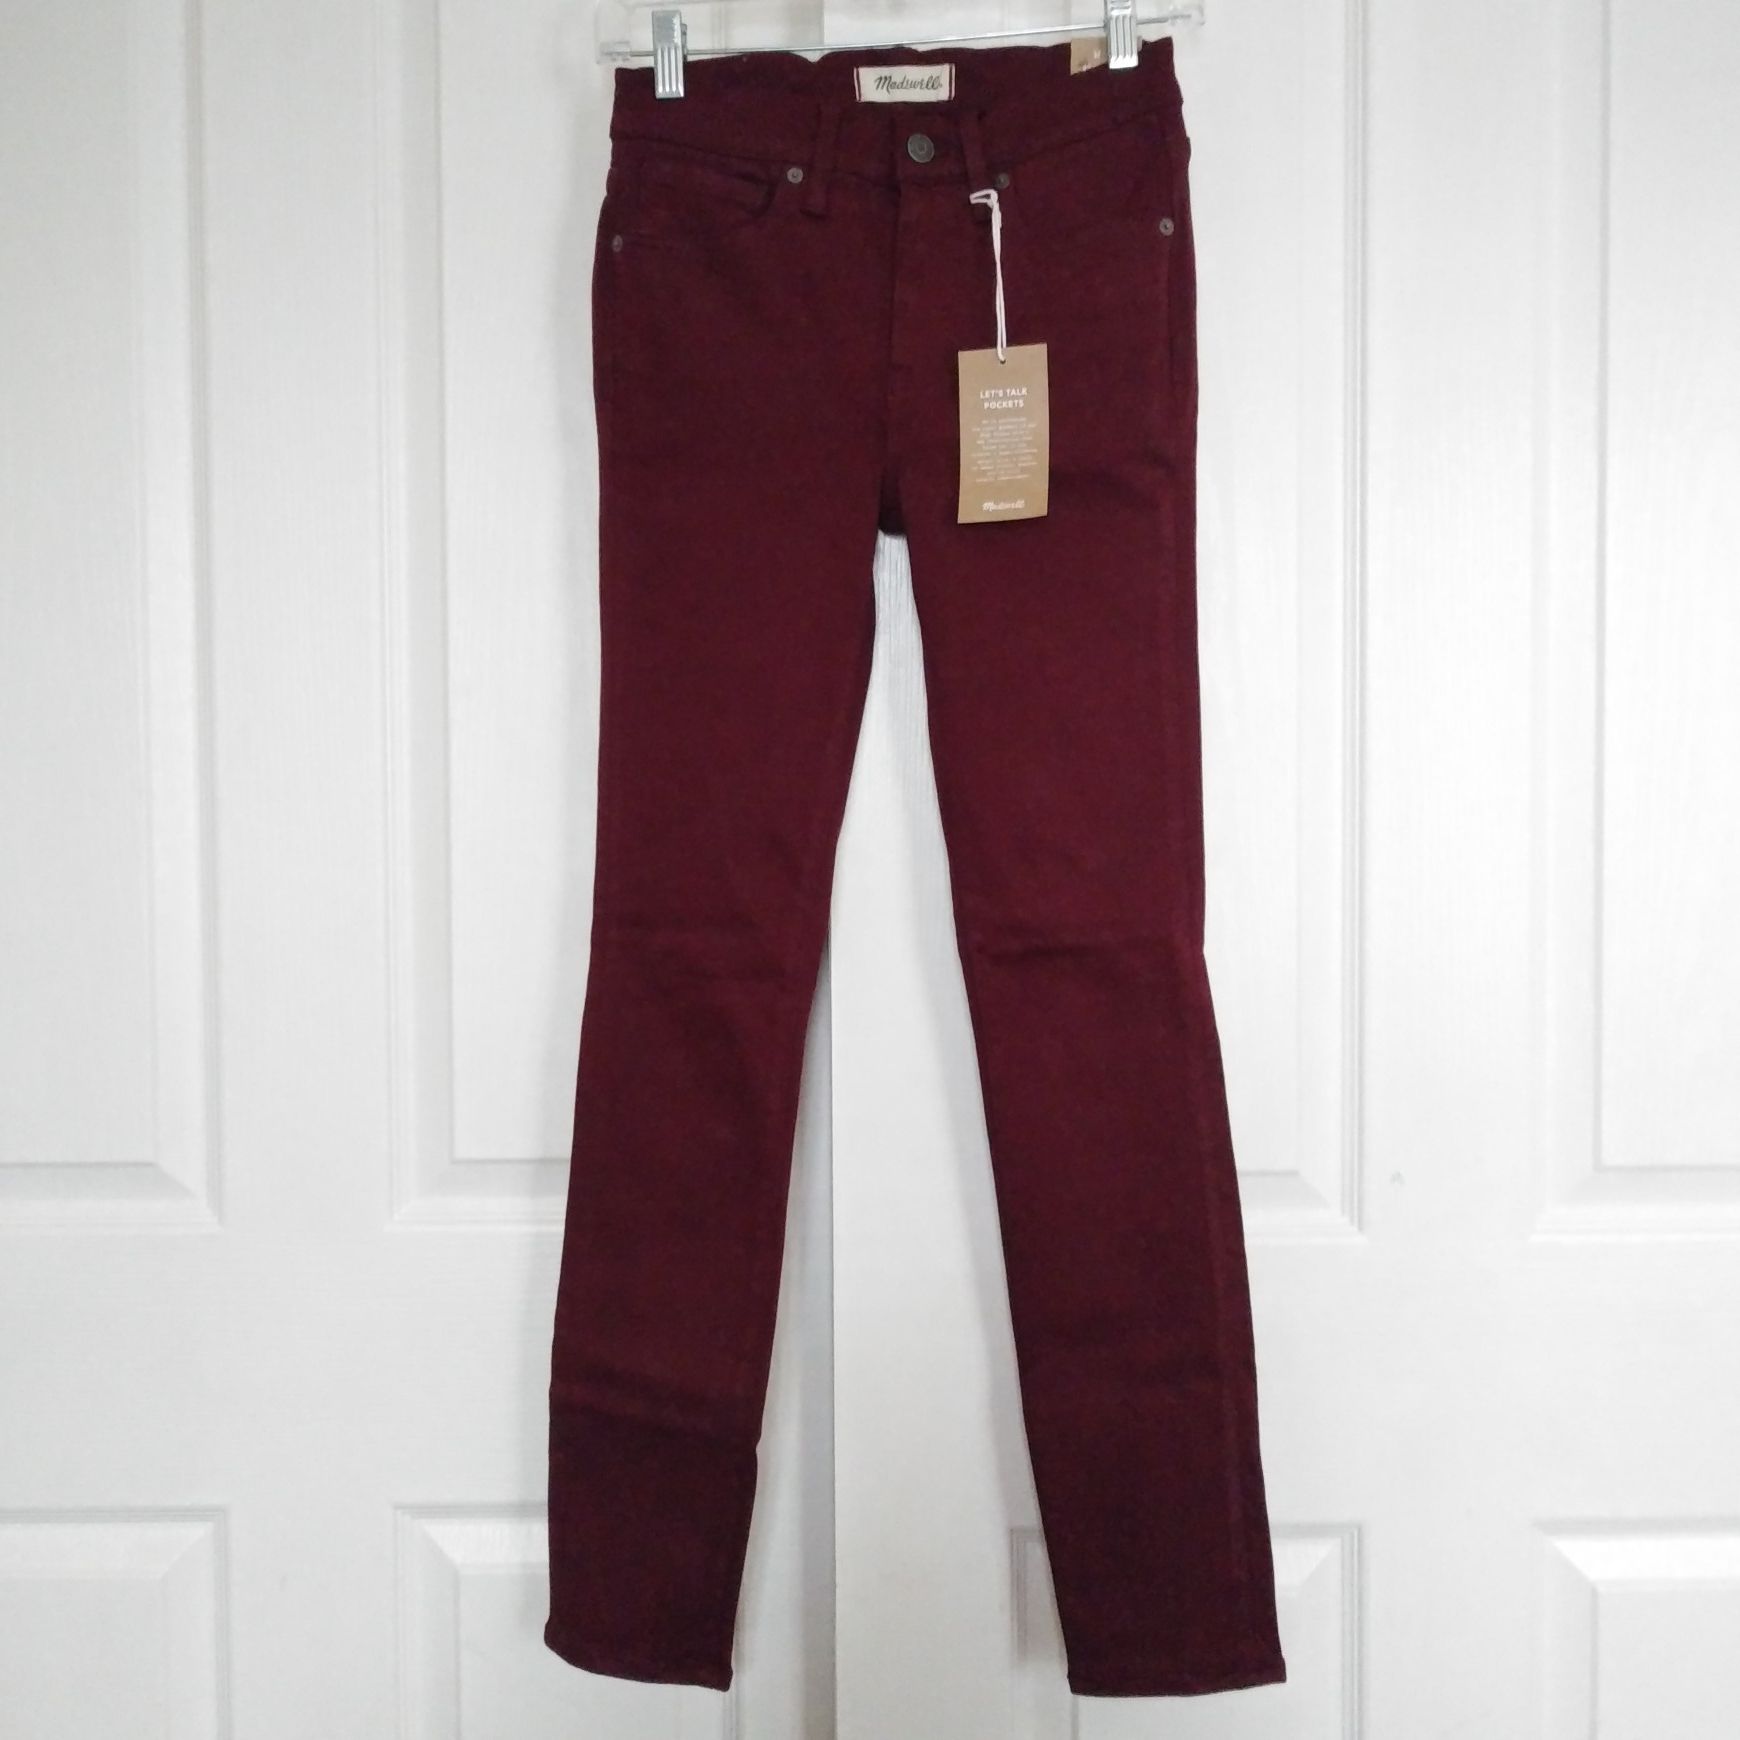 Womens Madewell 9in High Rise Skinny Jean Size 24